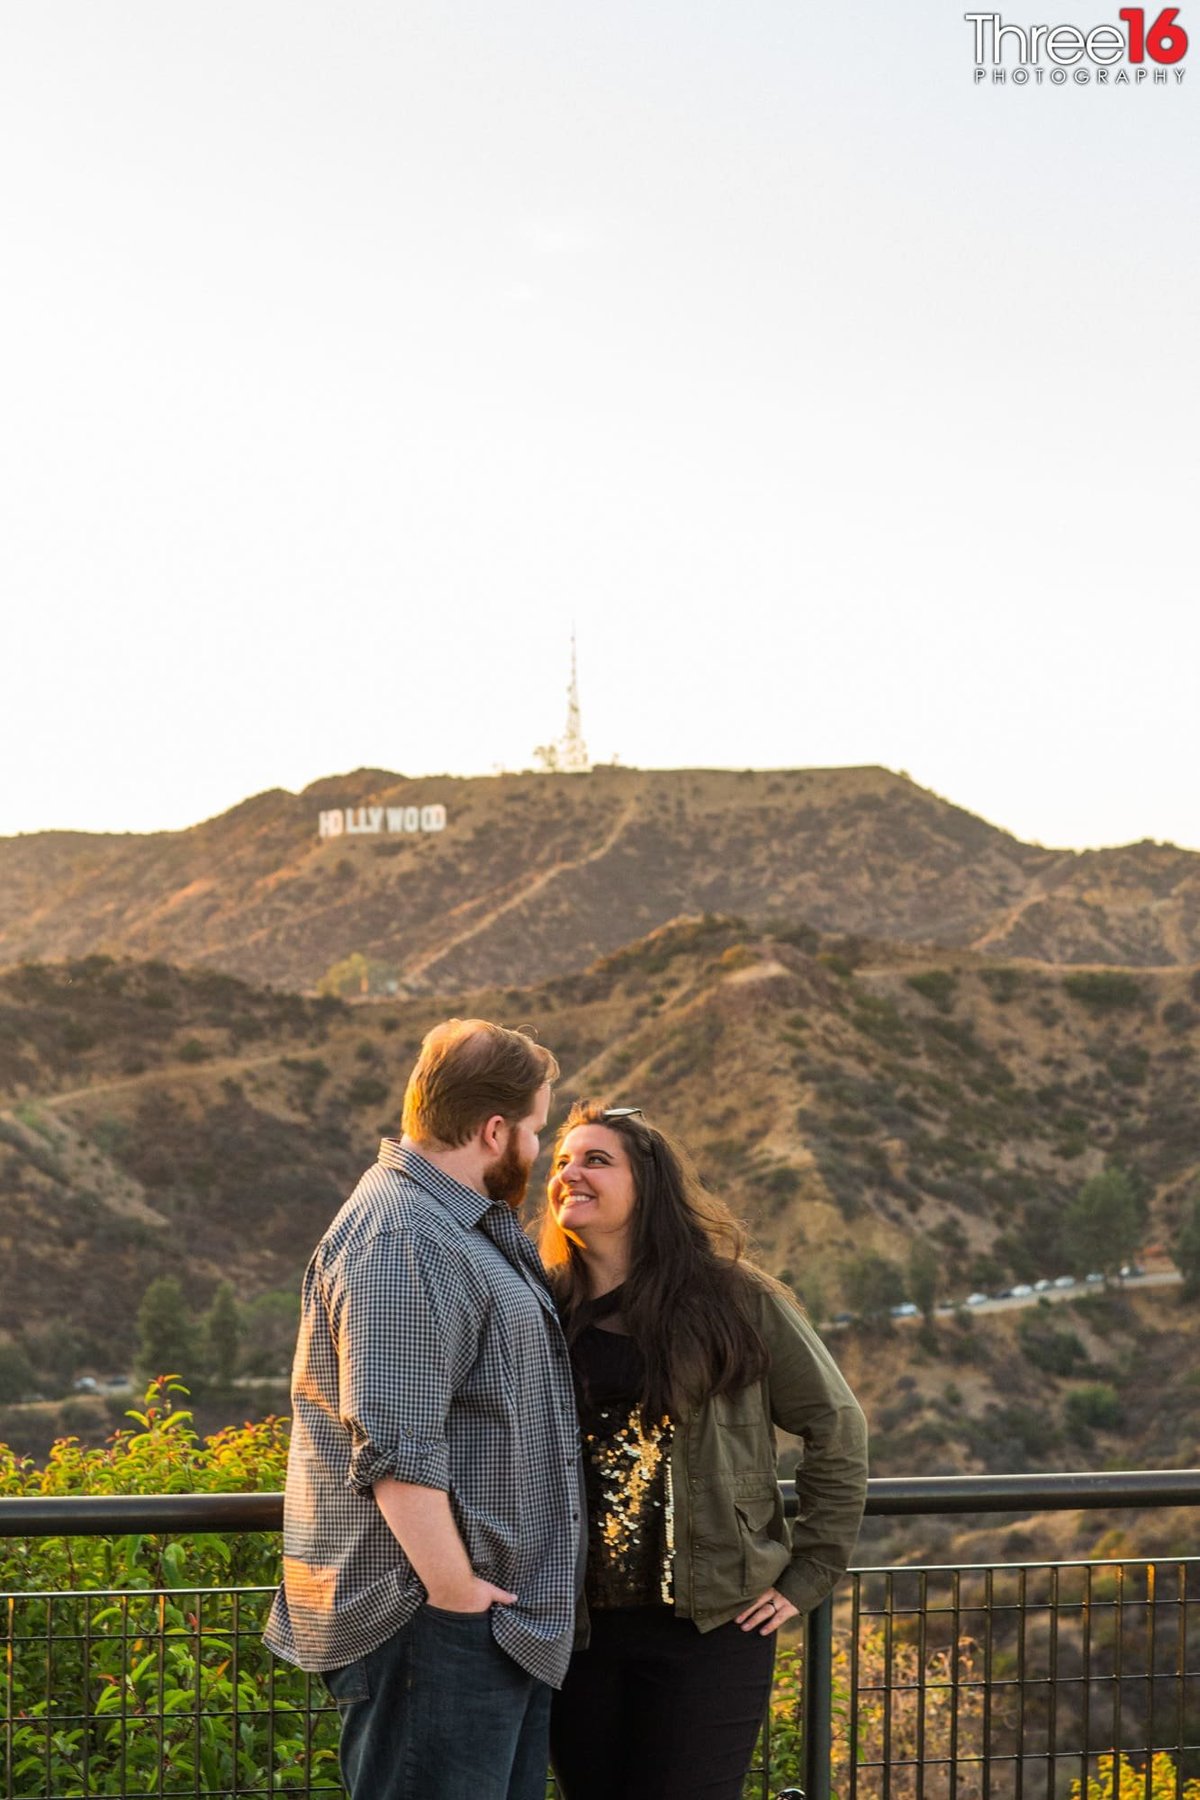 Engaged couple look into each other's eyes and smile while overlooking the hills and ravine outside at the Griffith Observatory